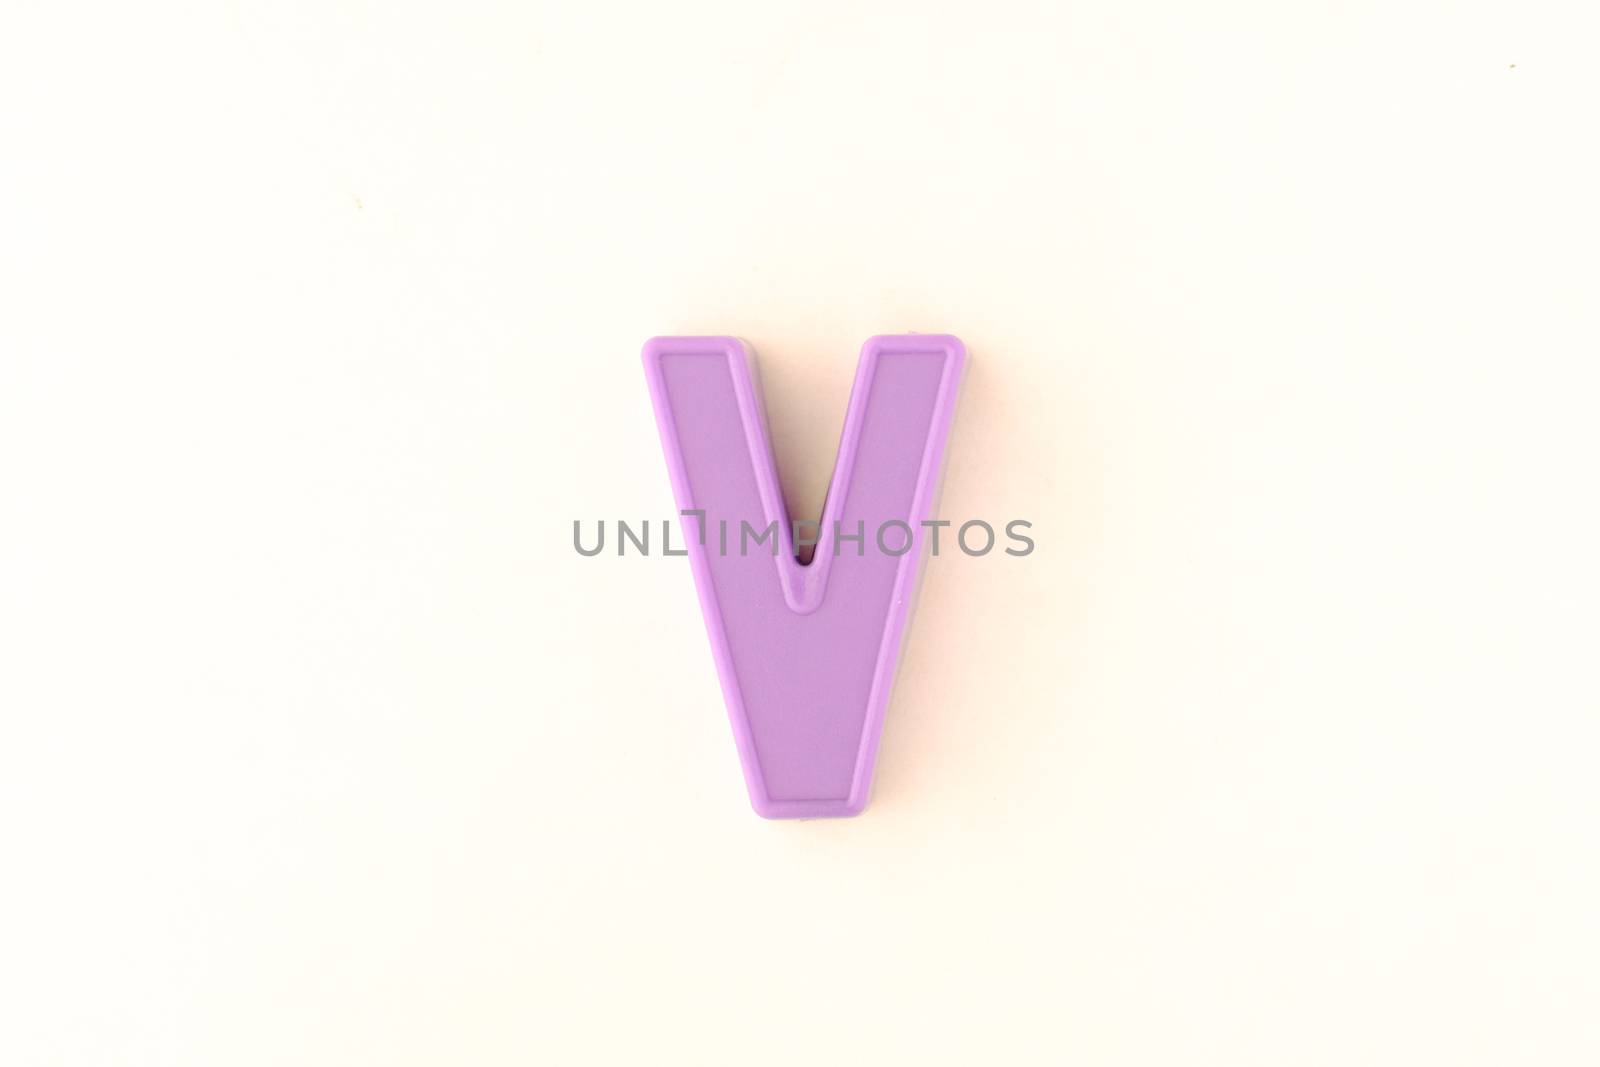 Colorful capital letter over white background